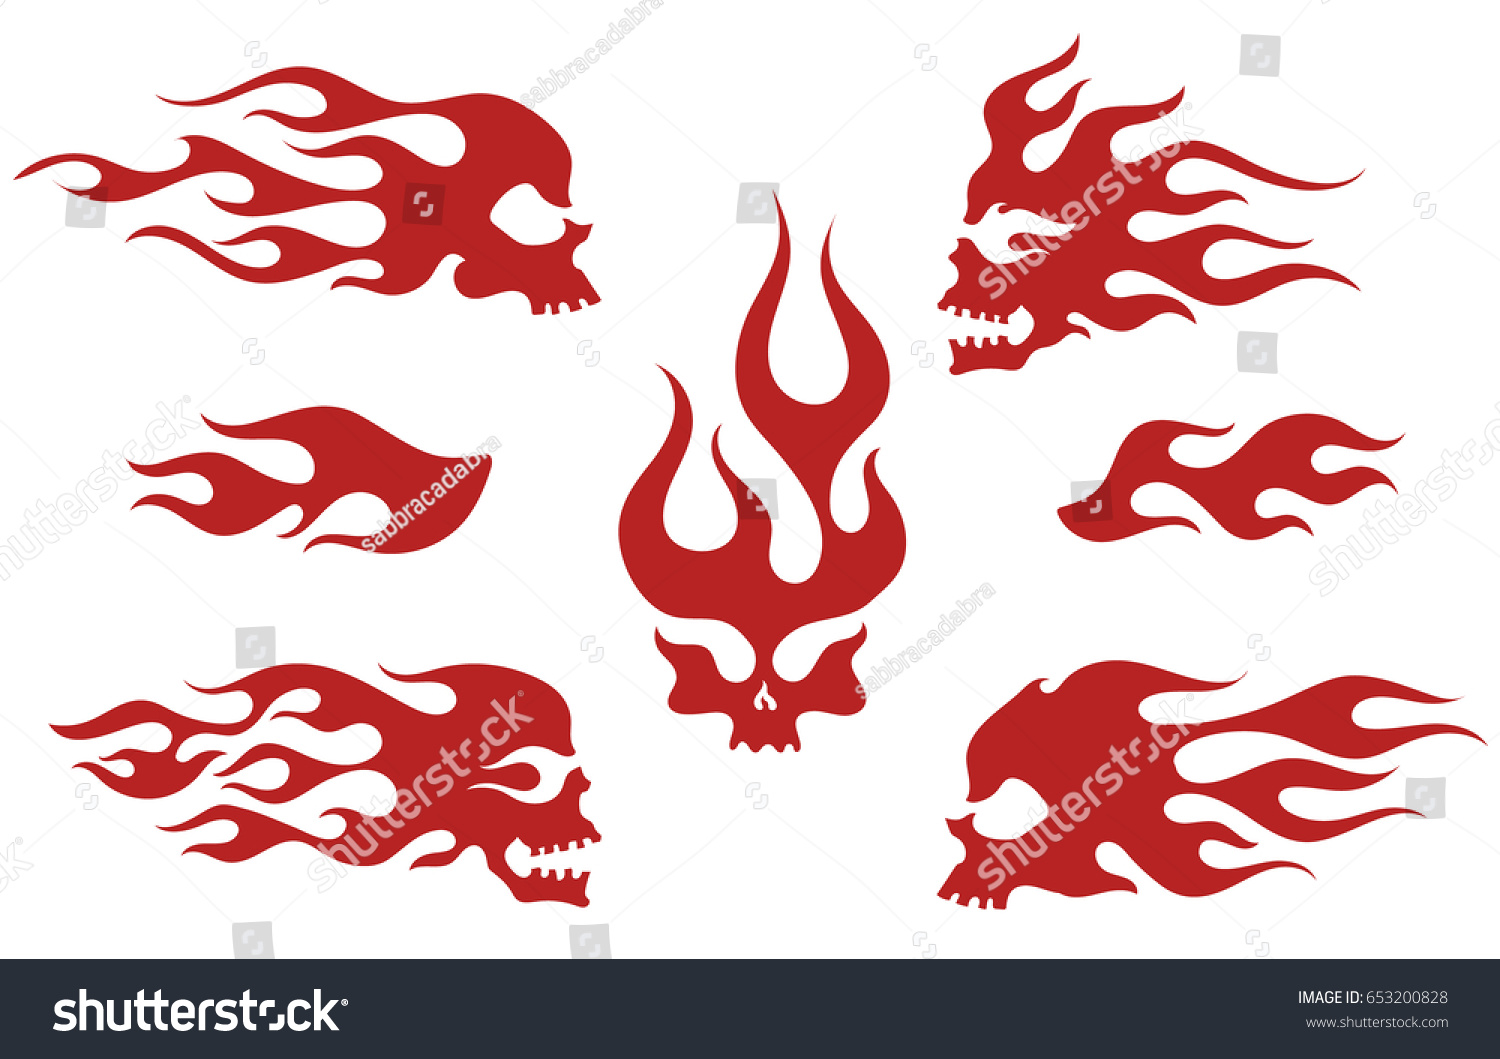 SVG of Red silhouettes of flaming skulls, emblem set, old school fire logos, isolated vector illustration svg